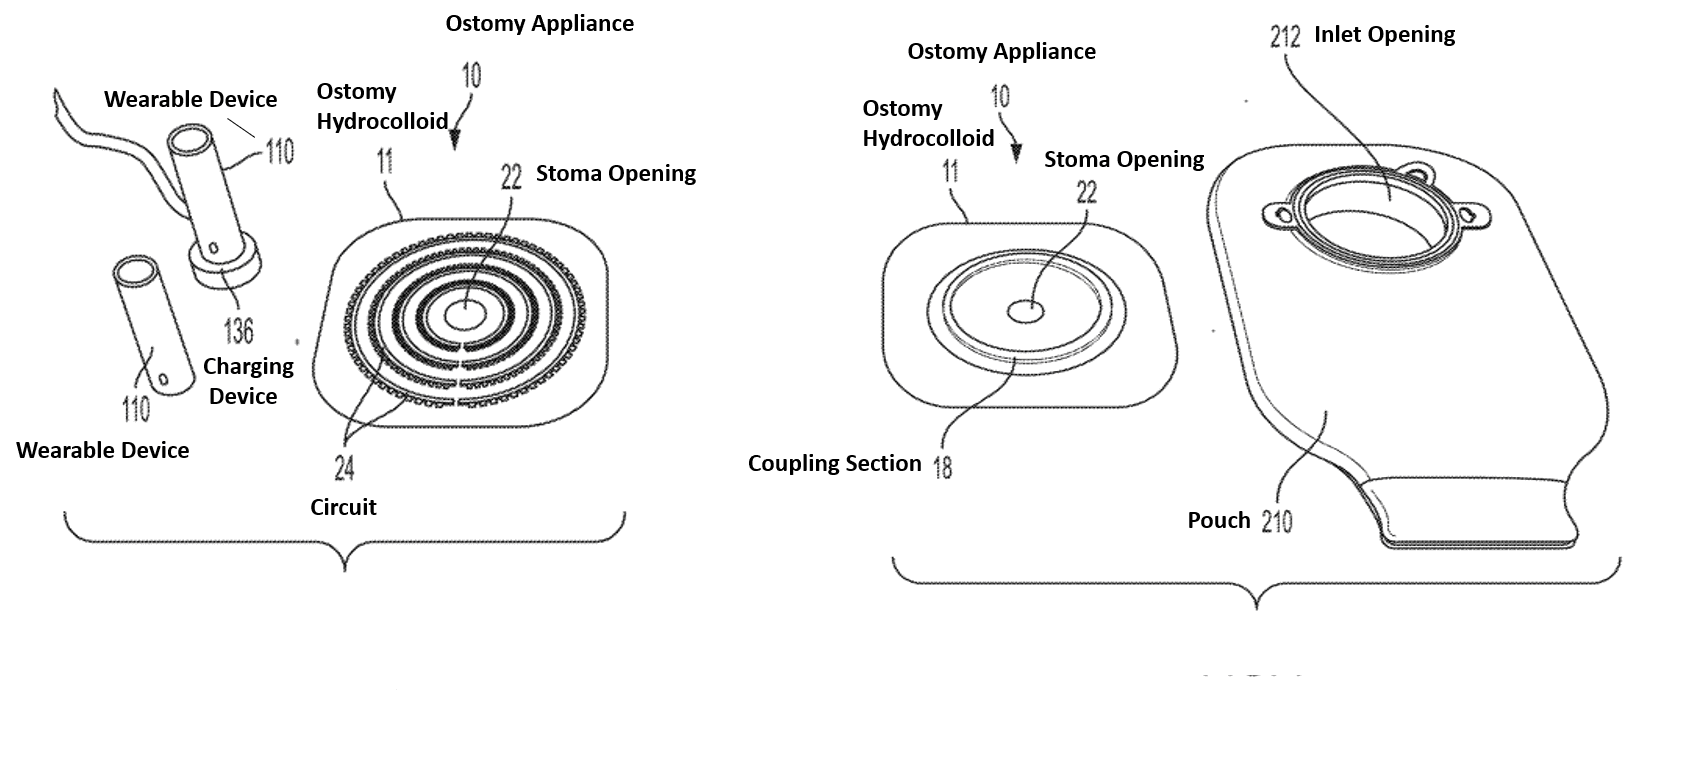 Ostomy-appliance-with-leakage-detection